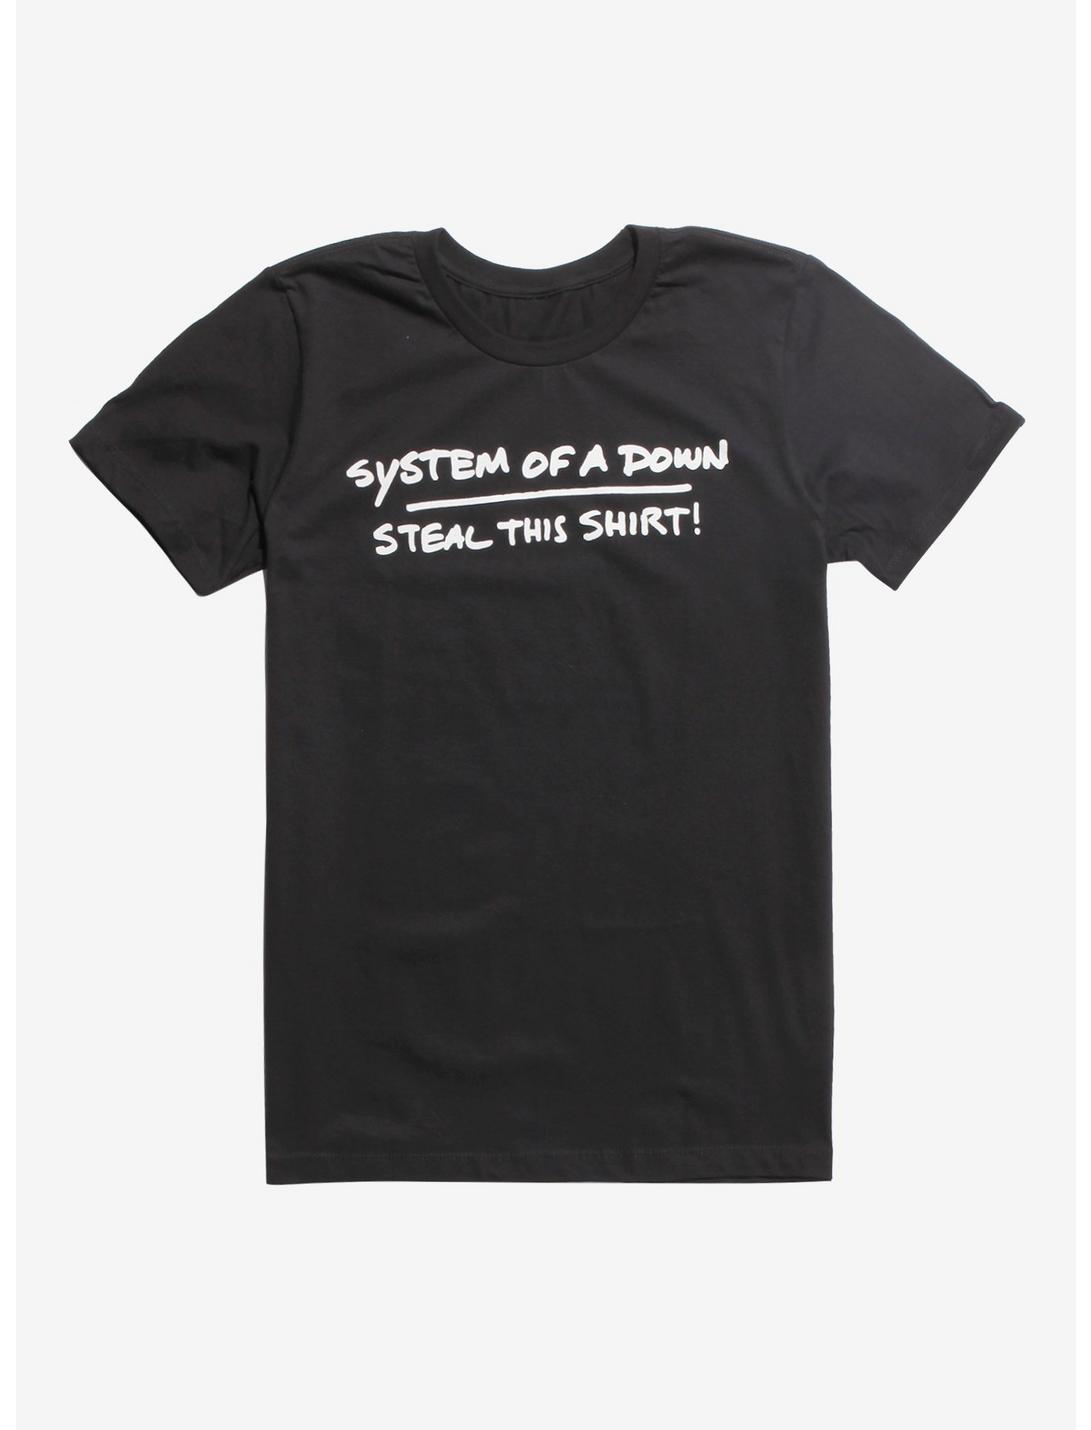 System Of A Down Steal This Shirt! T-Shirt, BLACK, hi-res